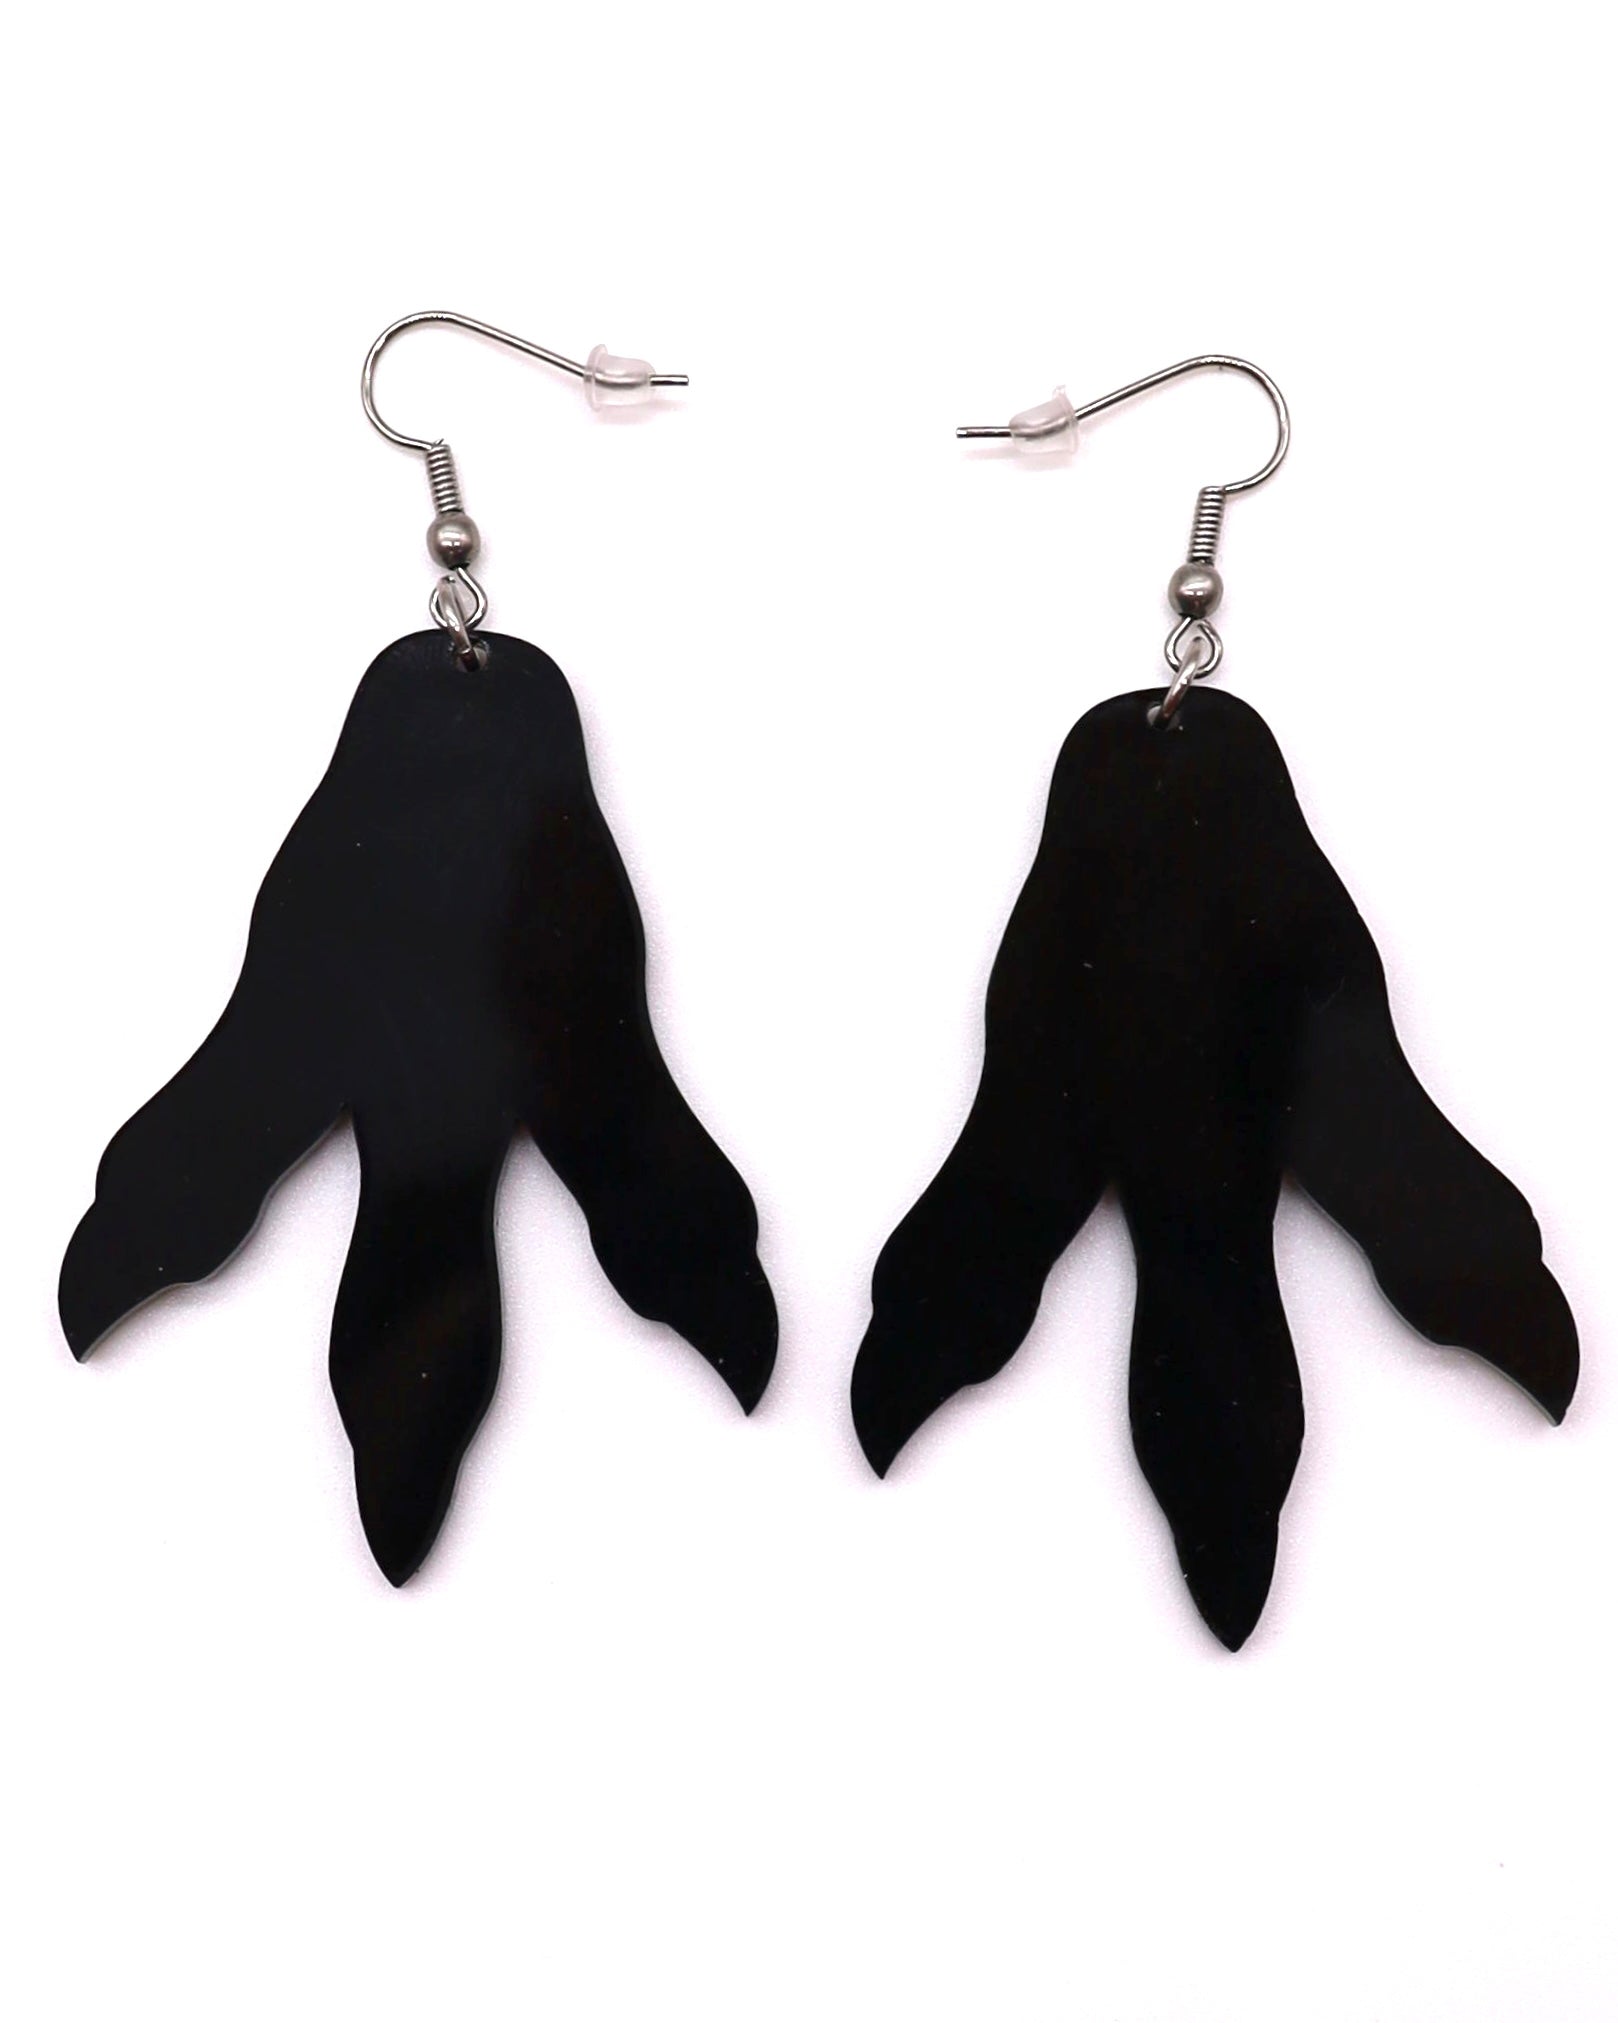 Dino Print Earrings in Black - Bold and Edgy Choice for Rave Enthusiasts